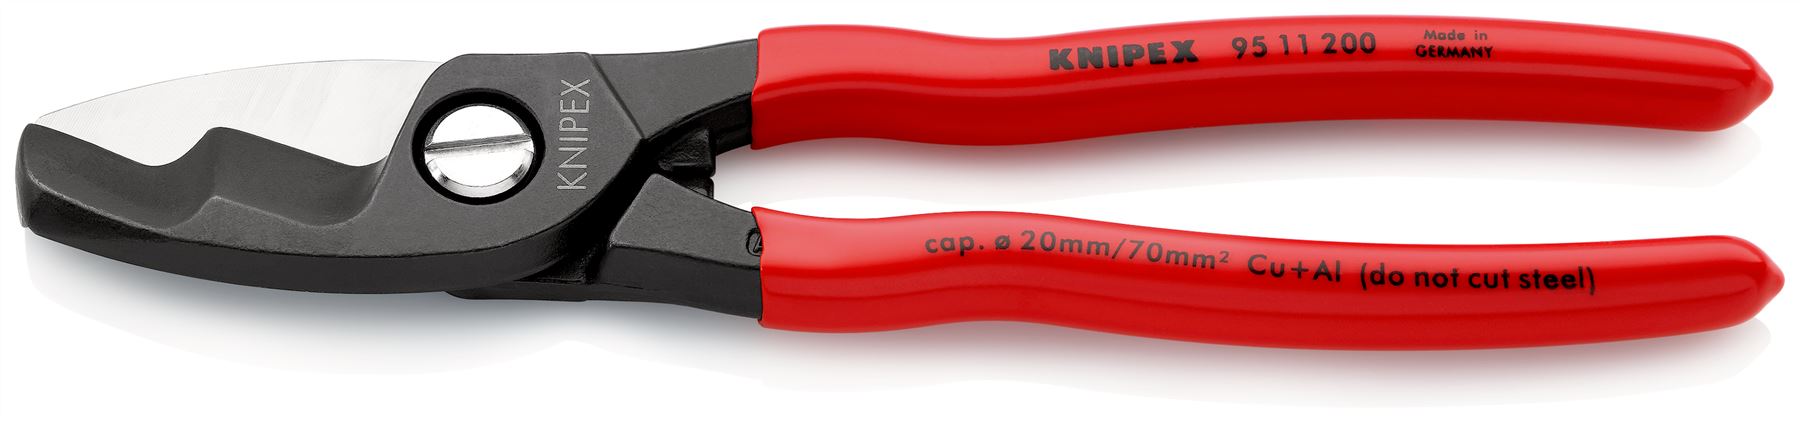 KNIPEX Cable Shears with Twin Cutting Edge 20mm Diameter Capacity 200mm Plastic Coated Handles 95 11 200